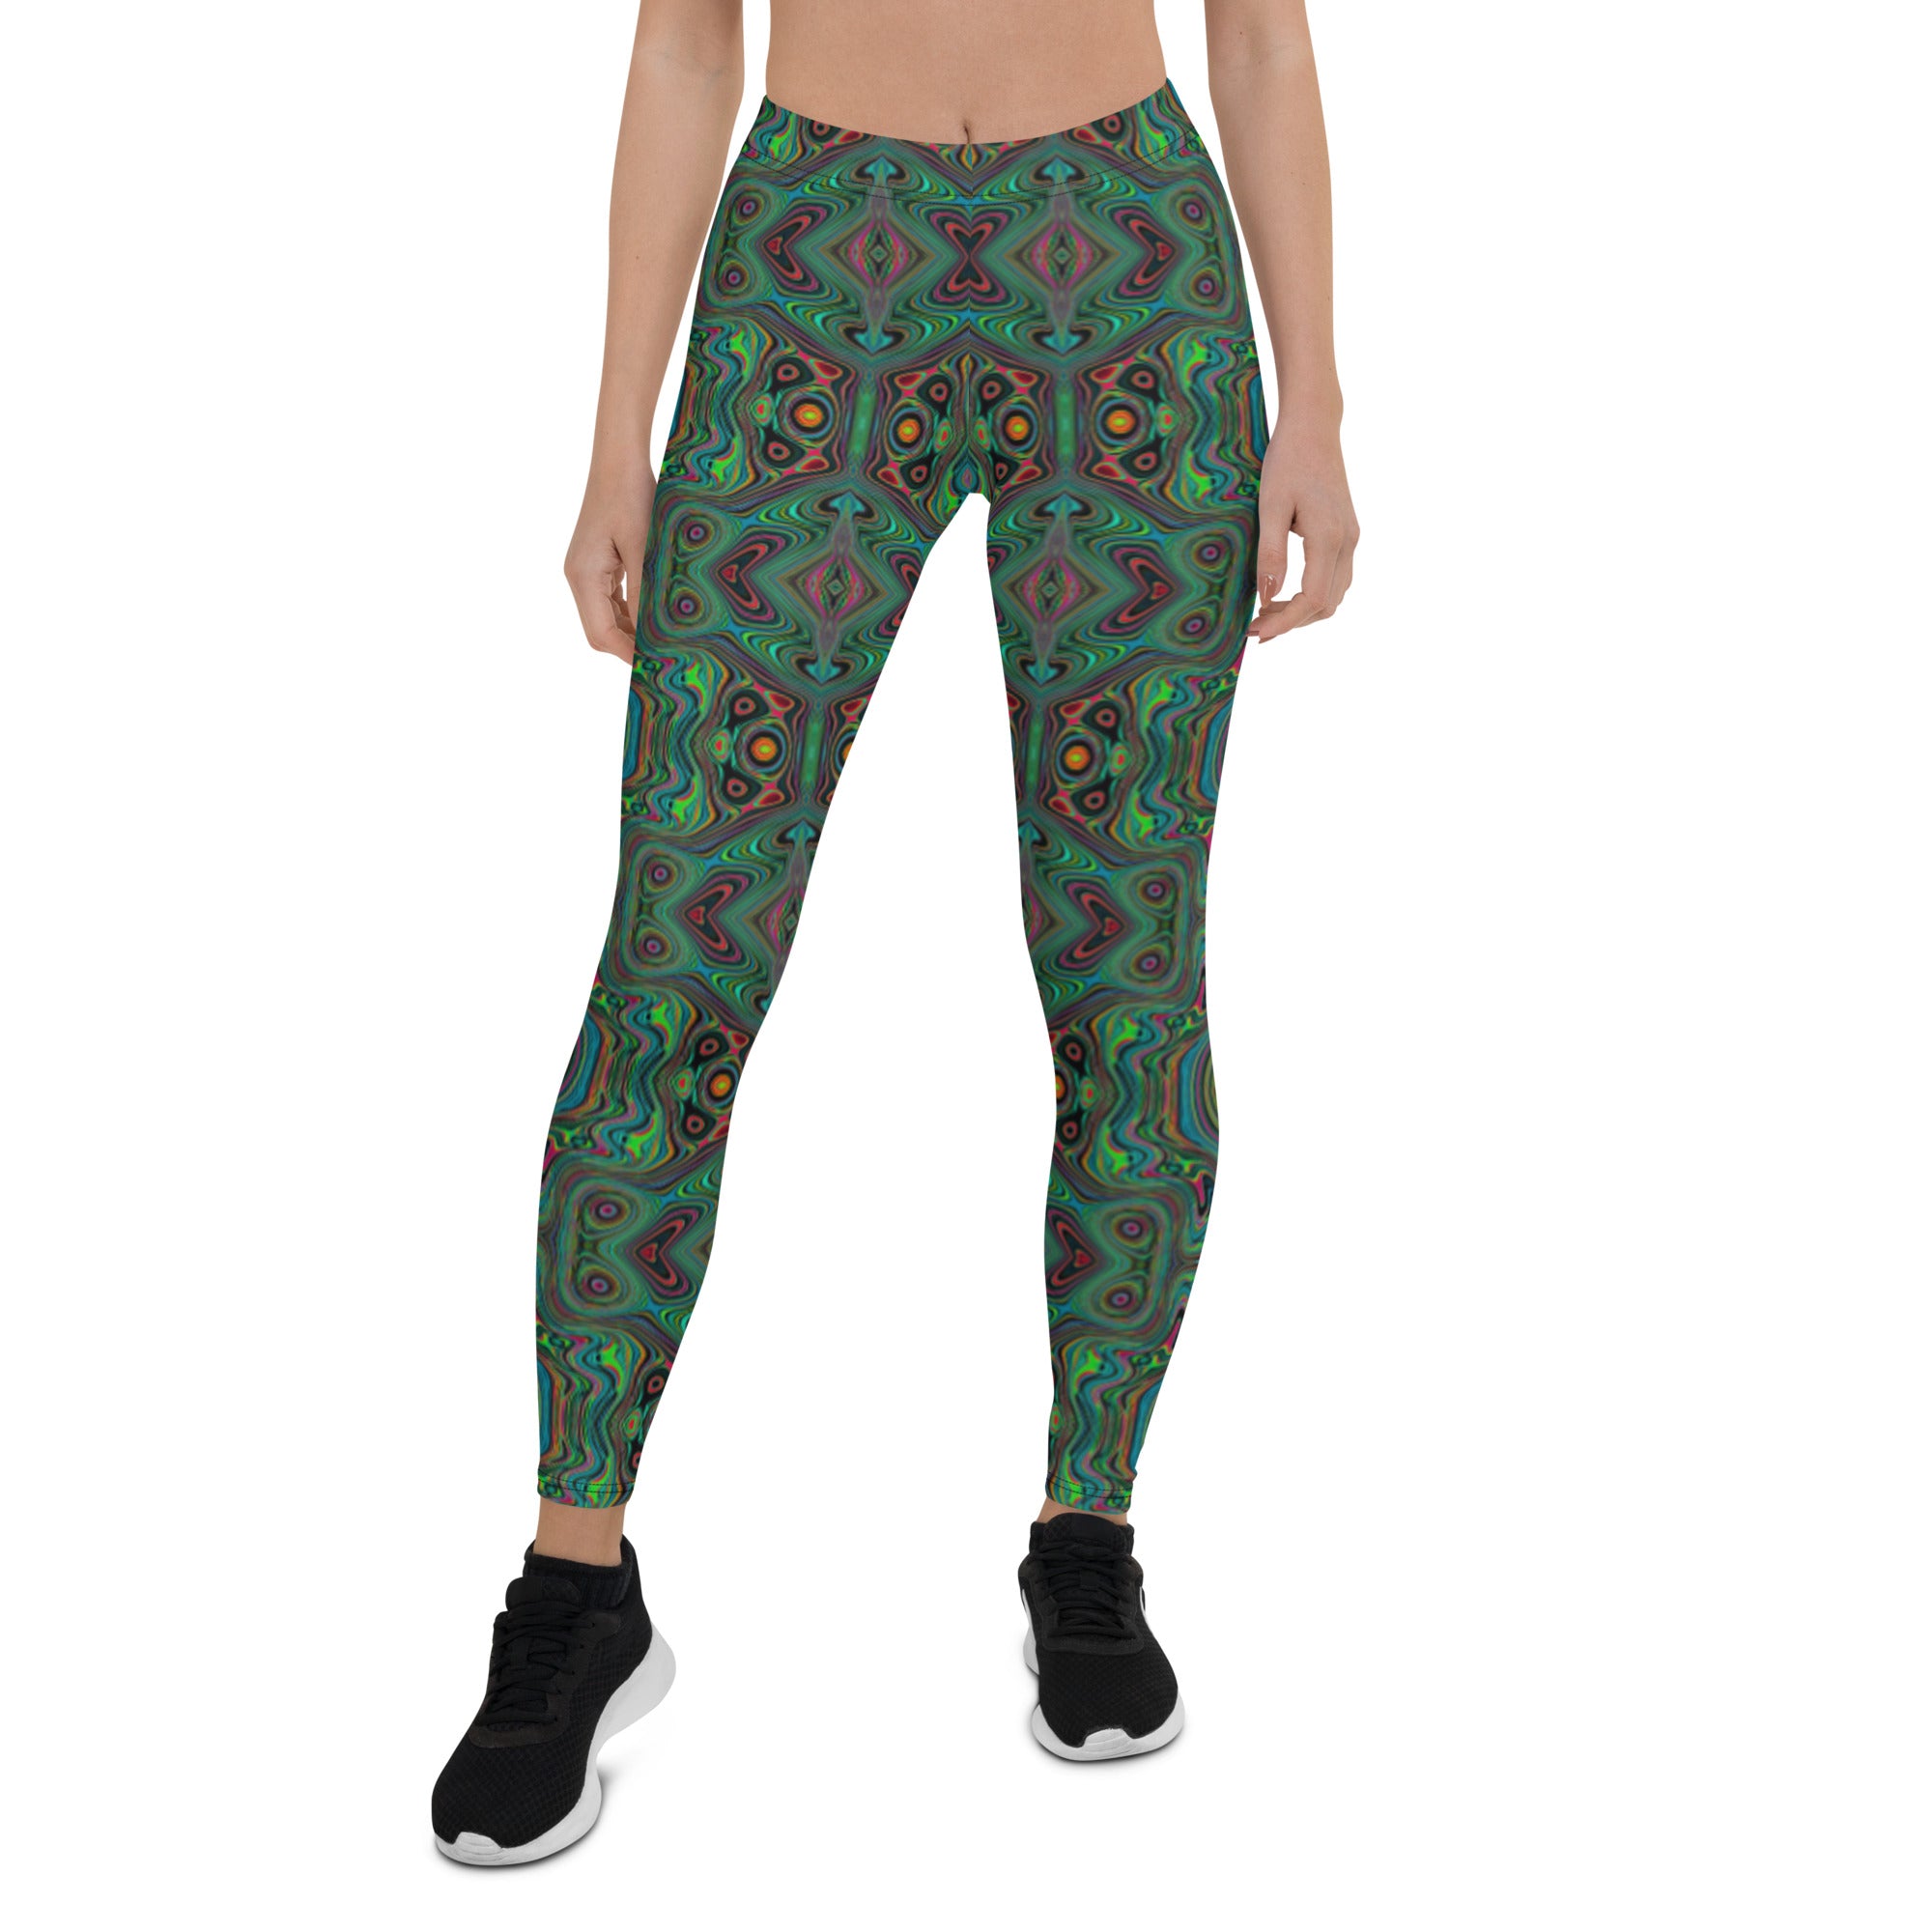 Leggings for Women, Trippy Retro Black and Lime Green Abstract Pattern